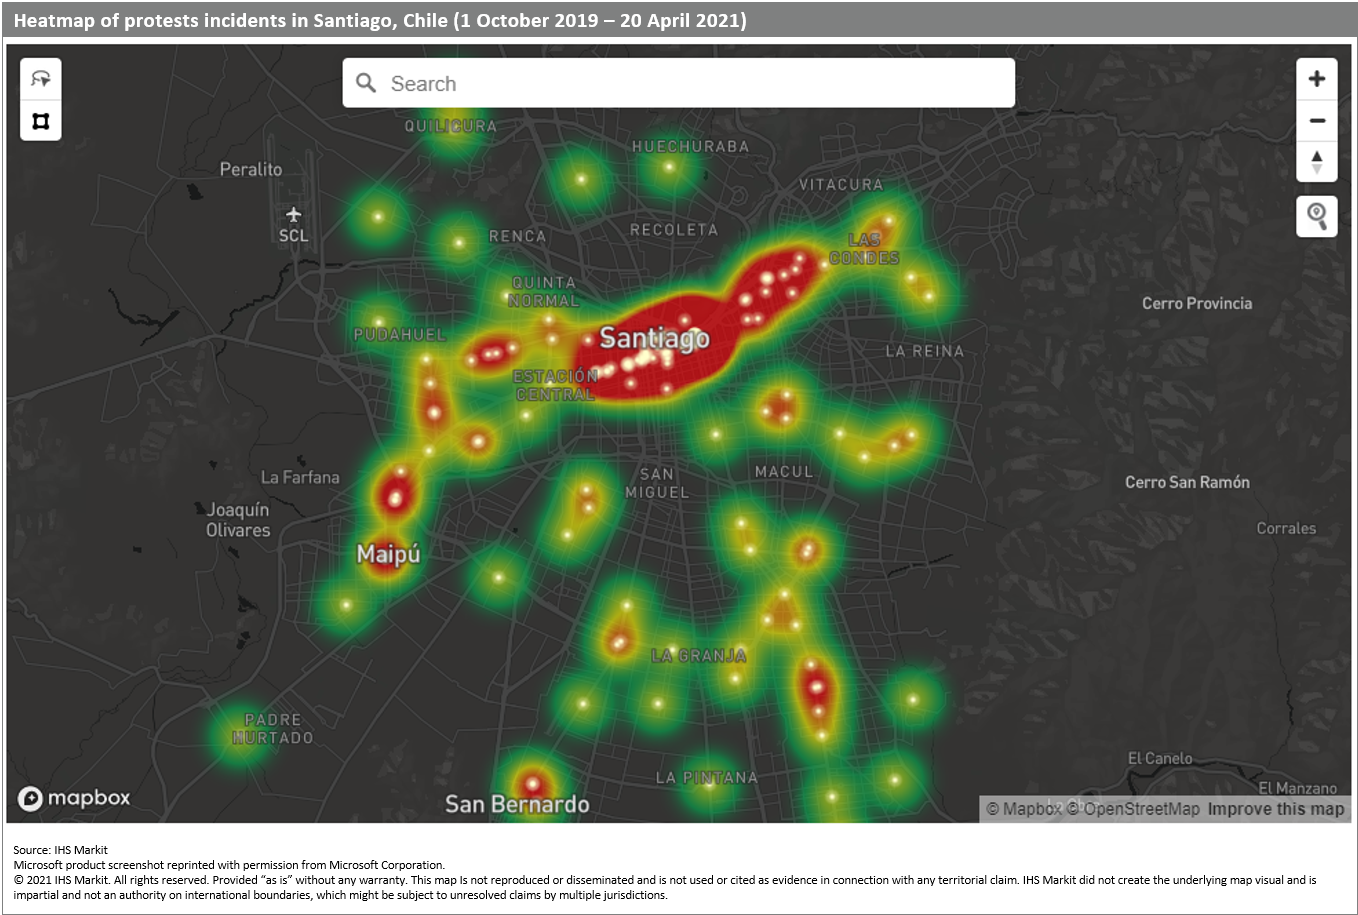 Heatmap of protests incidents in Santiago Chile October 2019 to April 2021